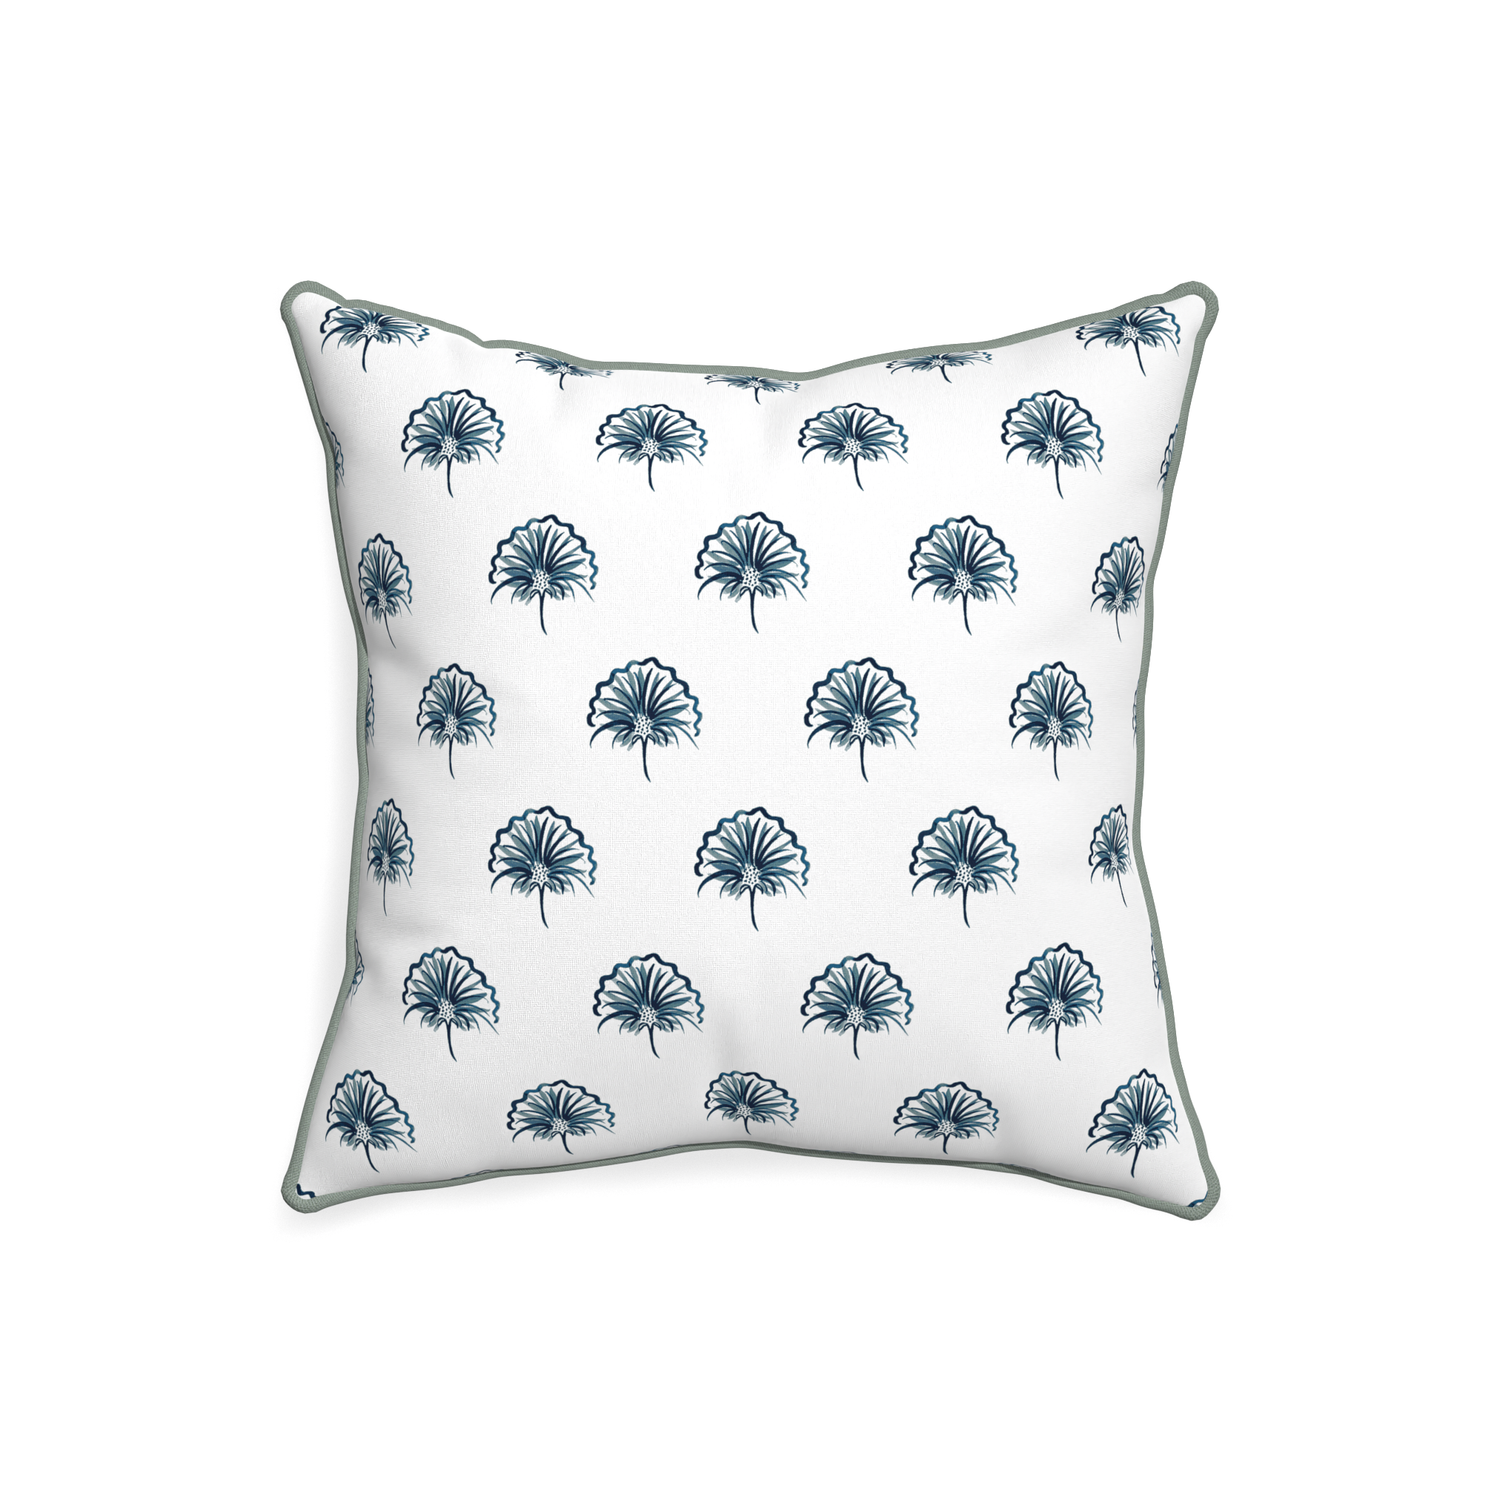 20-square penelope midnight custom floral navypillow with sage piping on white background